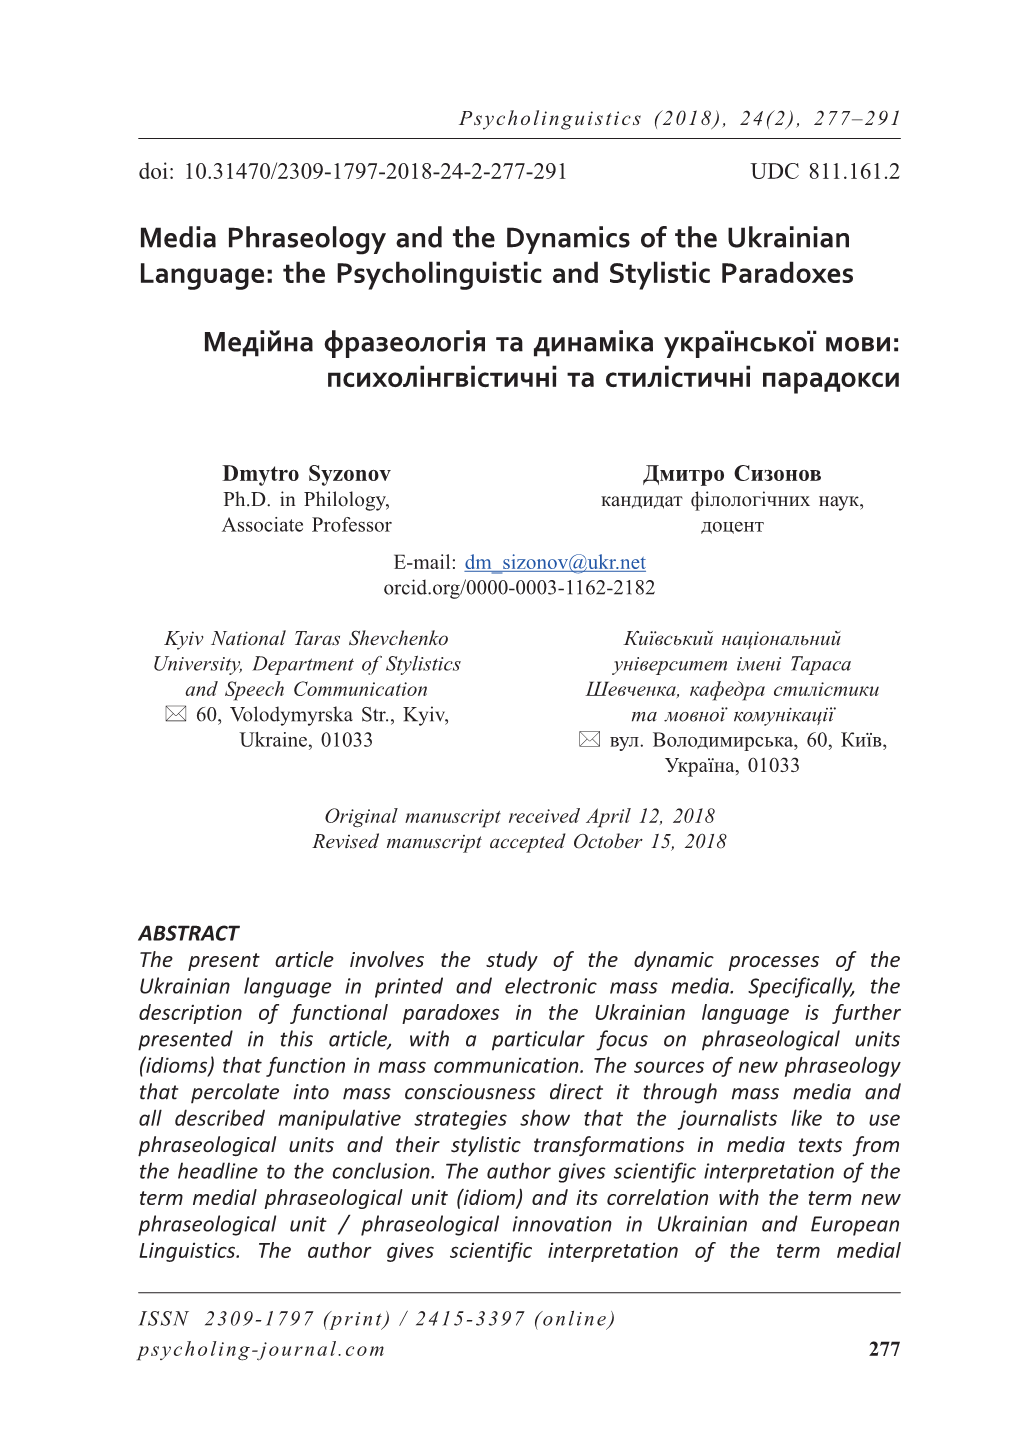 Media Phraseology and the Dynamics of the Ukrainian Language: the Psycholinguistic and Stylistic Paradoxes